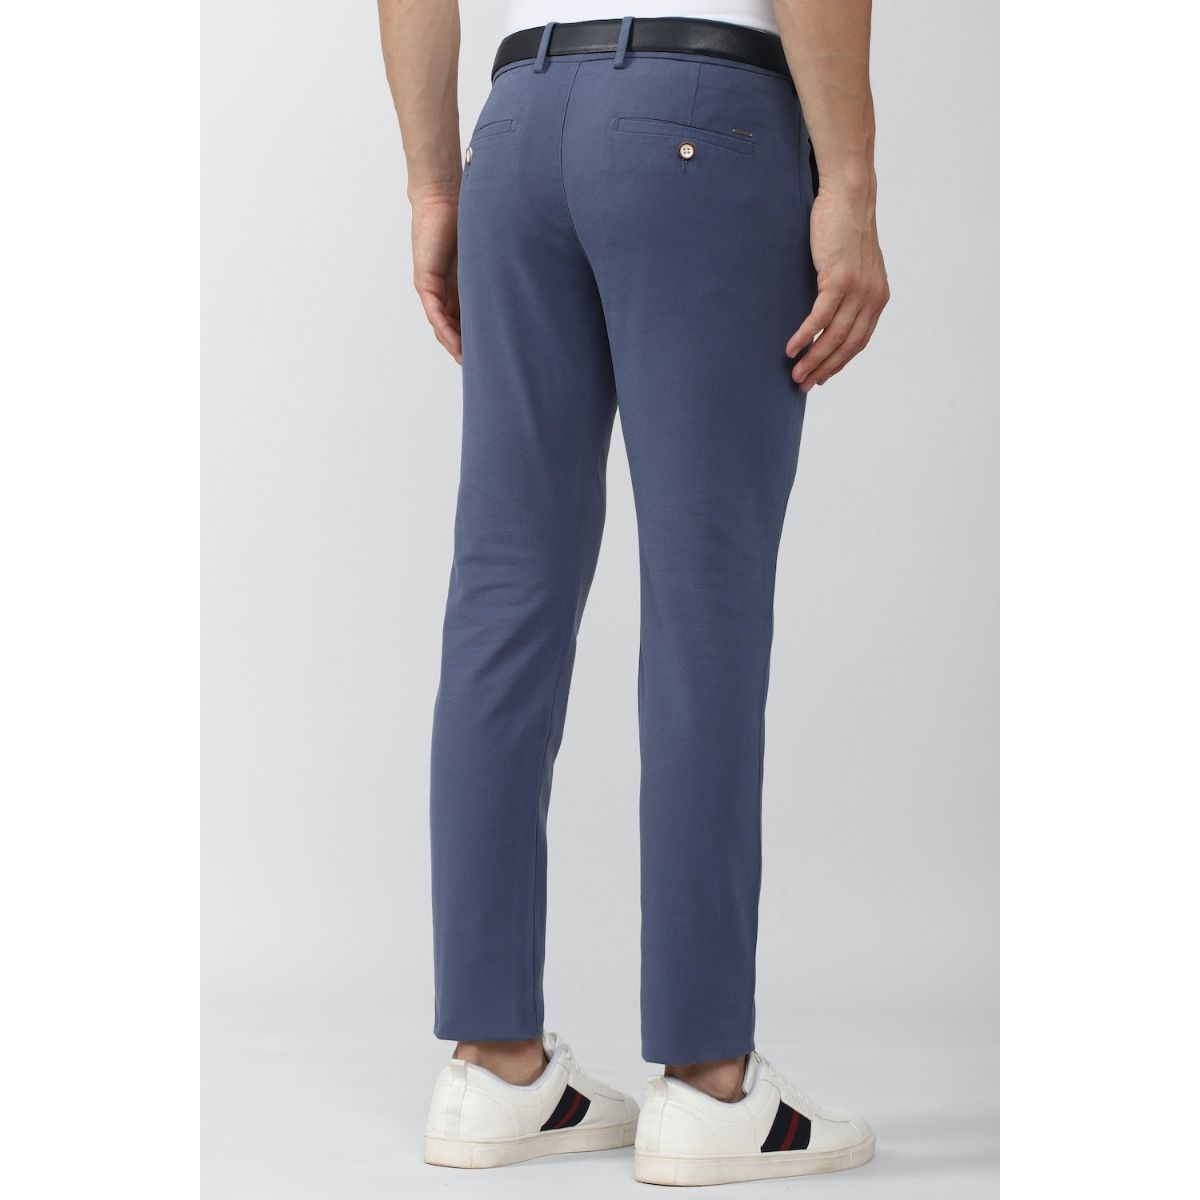 Peter England Casual Trousers  Buy Peter England Men Cream Solid Super Slim  Fit Casual Trousers Online  Nykaa Fashion